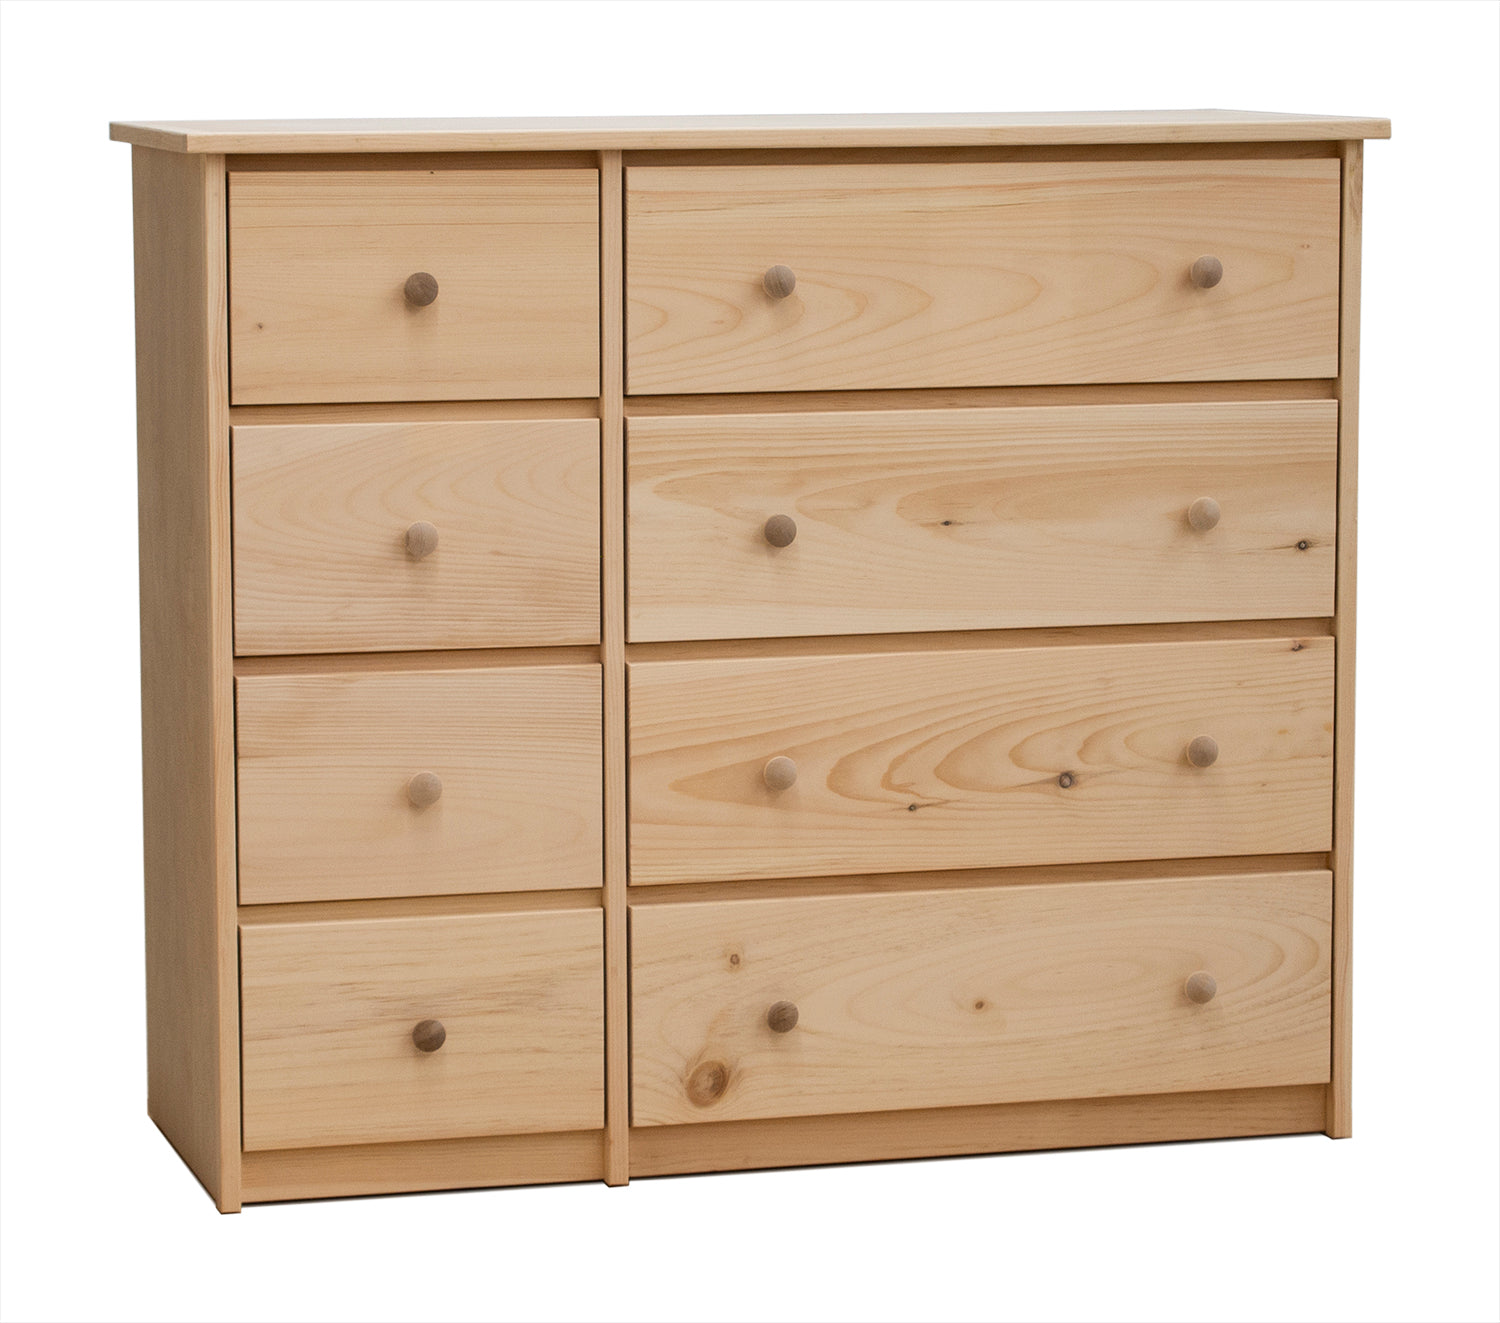 Evergreen Combo Dresser shown unfinished, constructed in pine and birch with eight drawers.